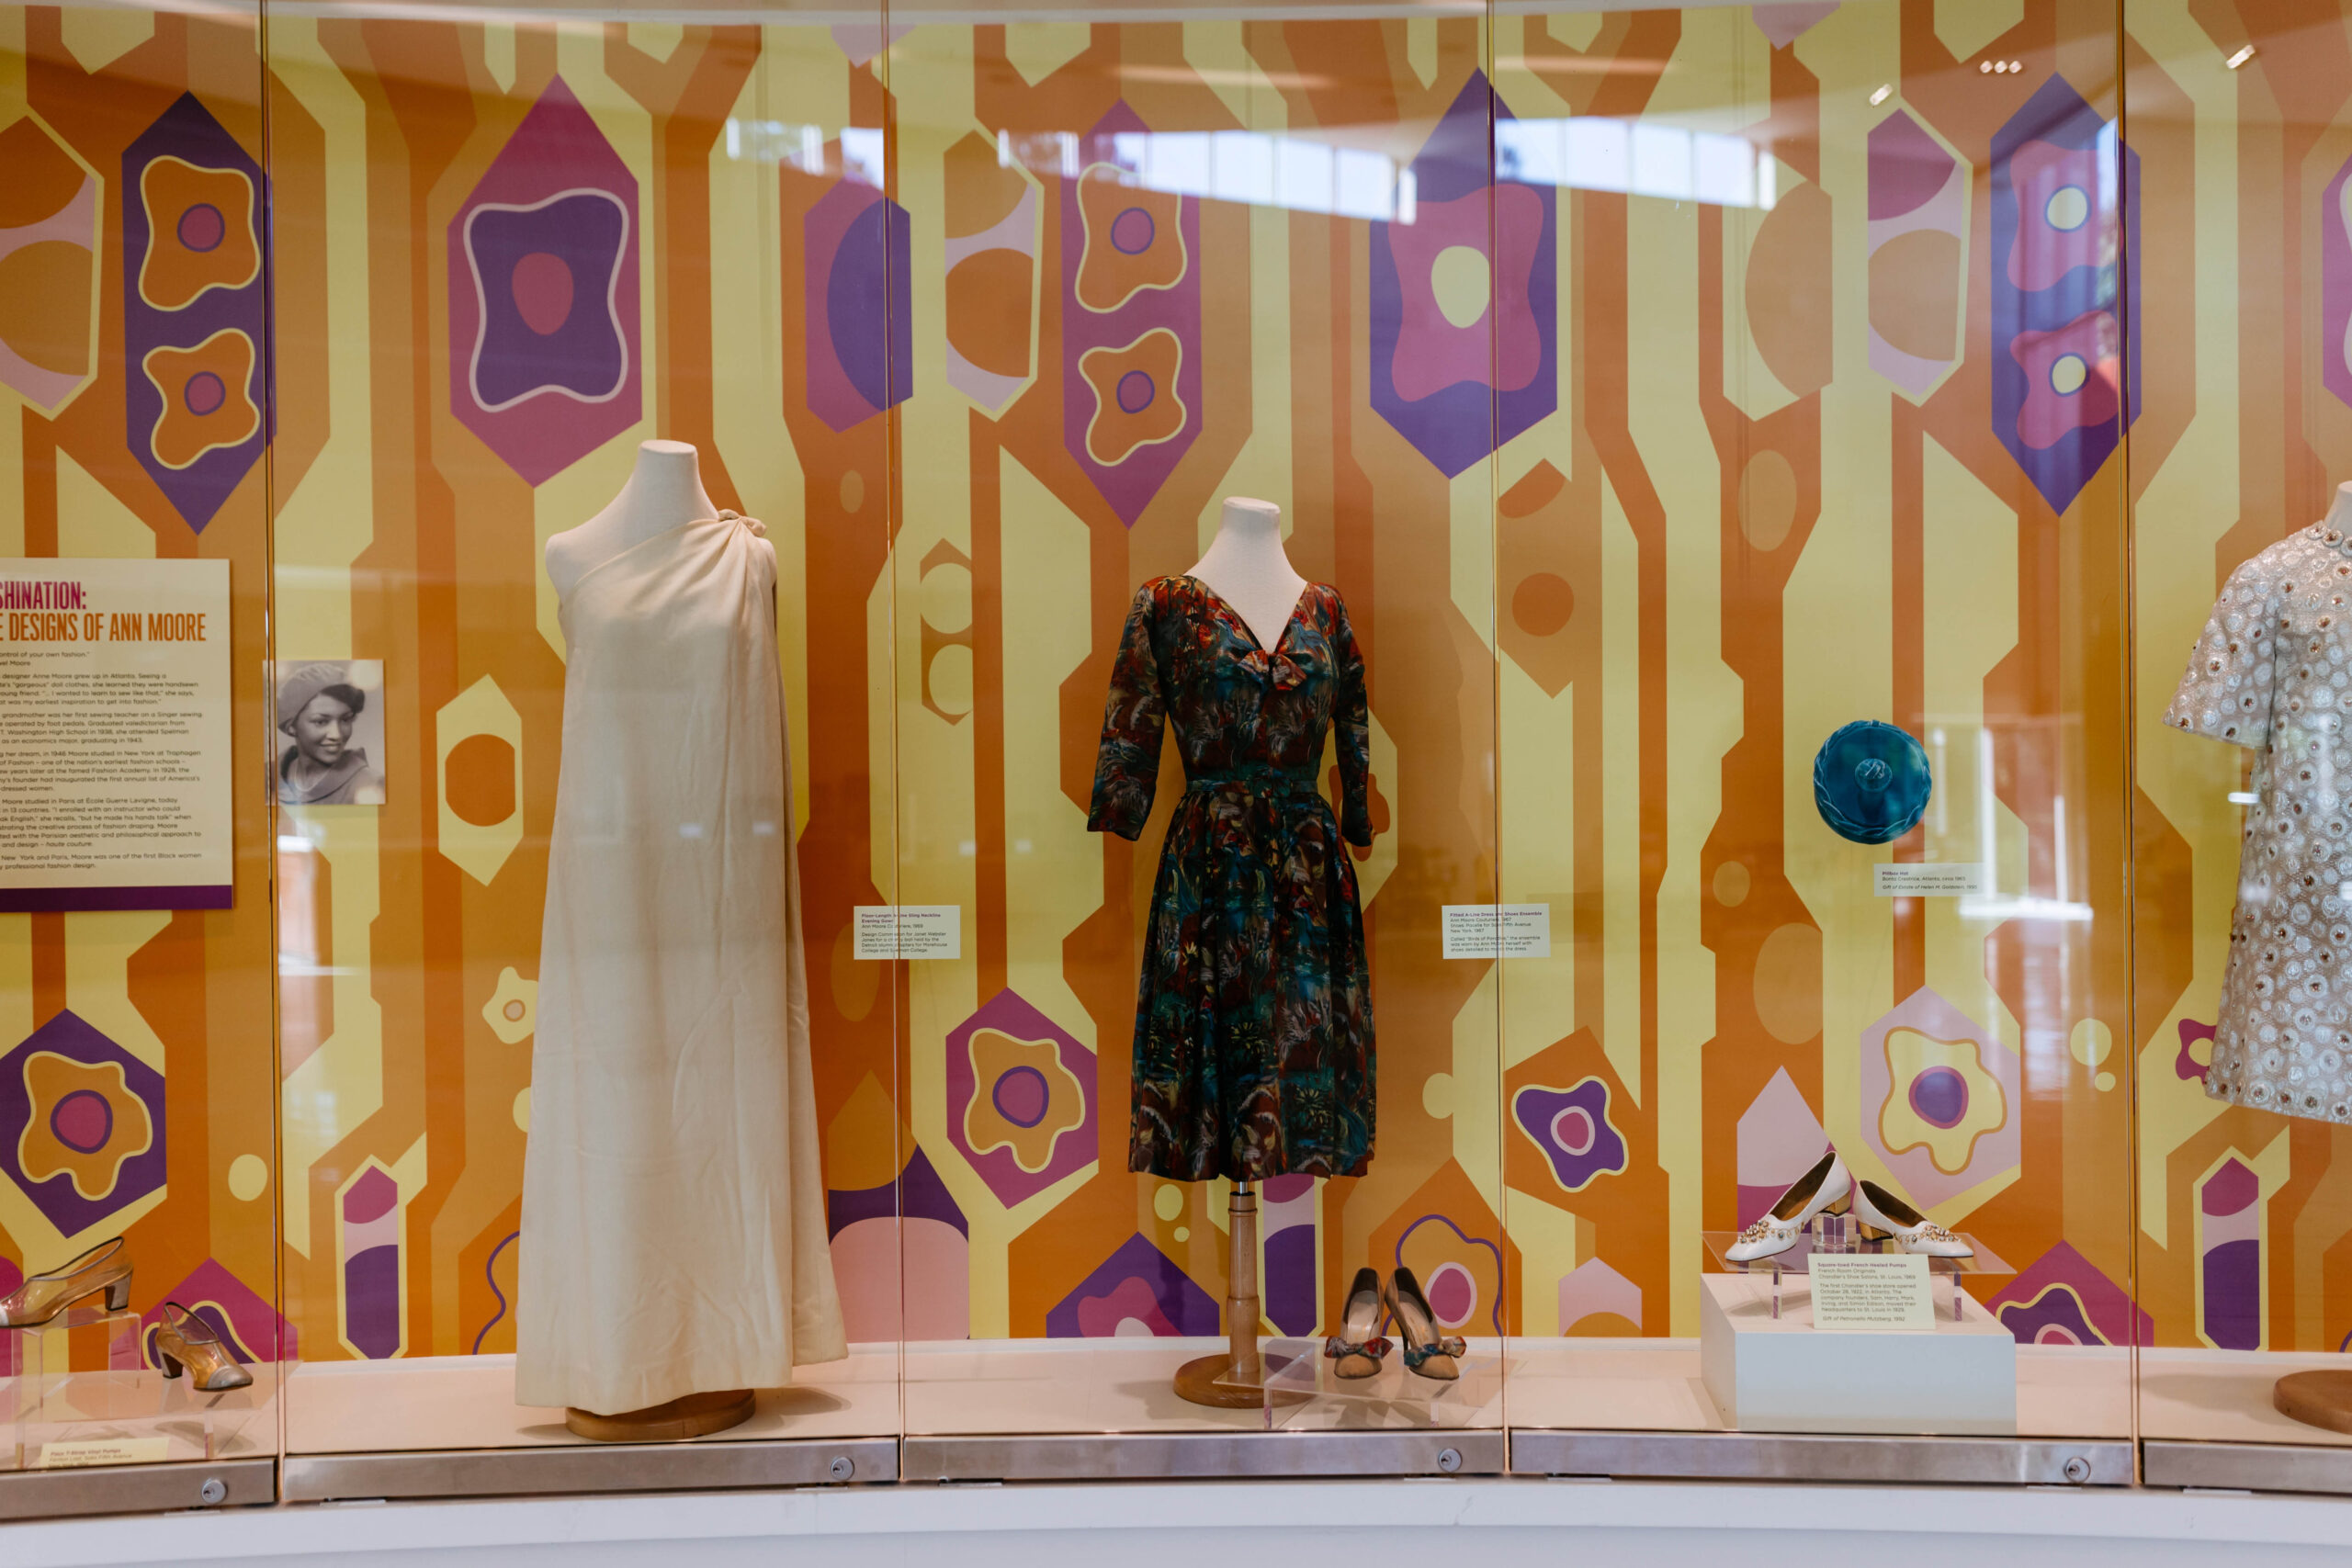 two dresses designed by Ann Moore in glass displays